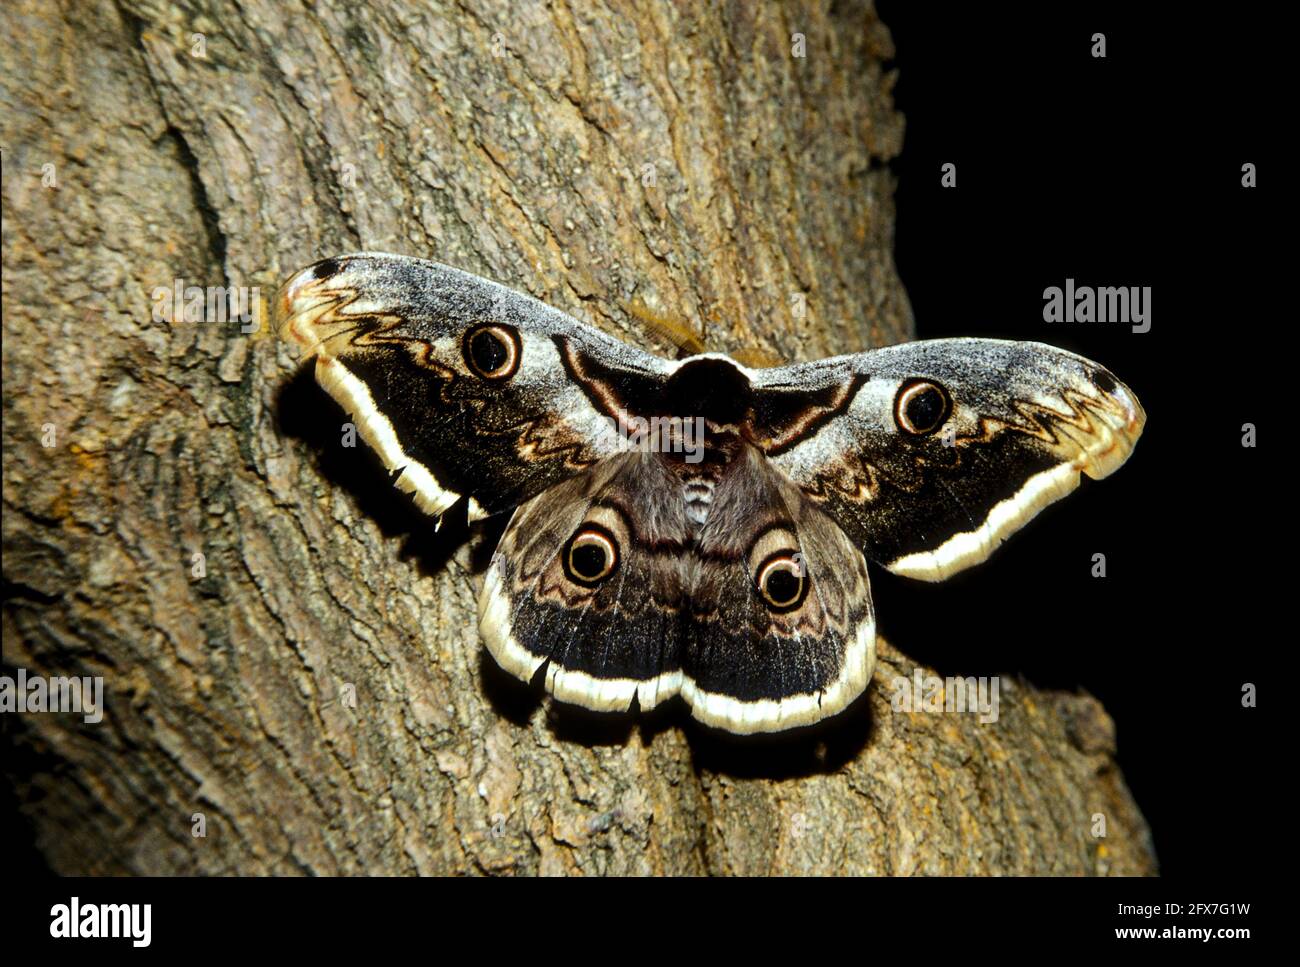 Giant peacock moth (Saturnia pyri), also called the great peacock moth, giant emperor moth, or Viennese emperor, is a Saturniid moth which is native t Stock Photo